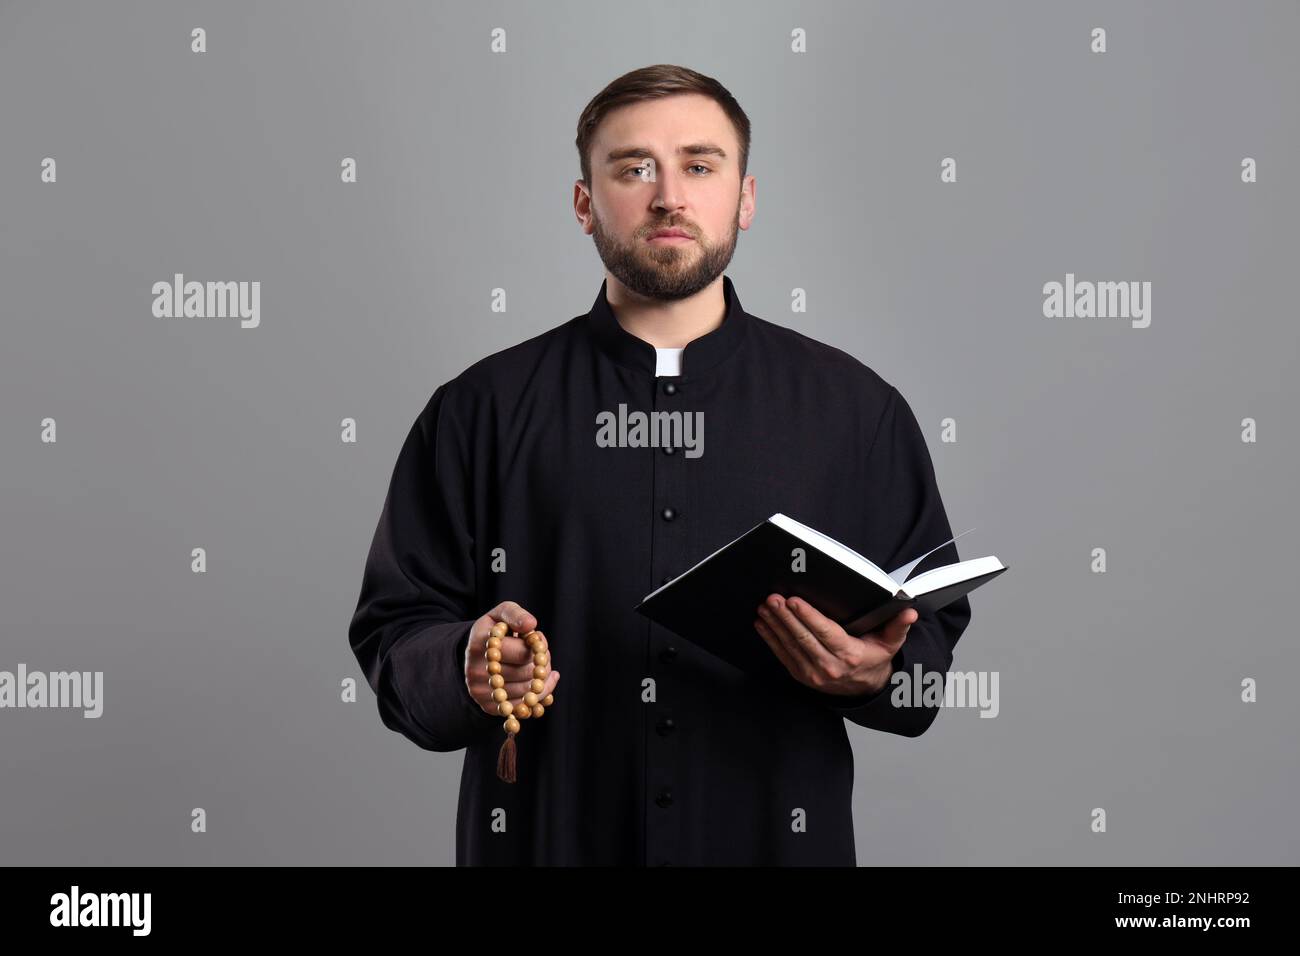 Priest with beads and Bible praying on grey background Stock Photo